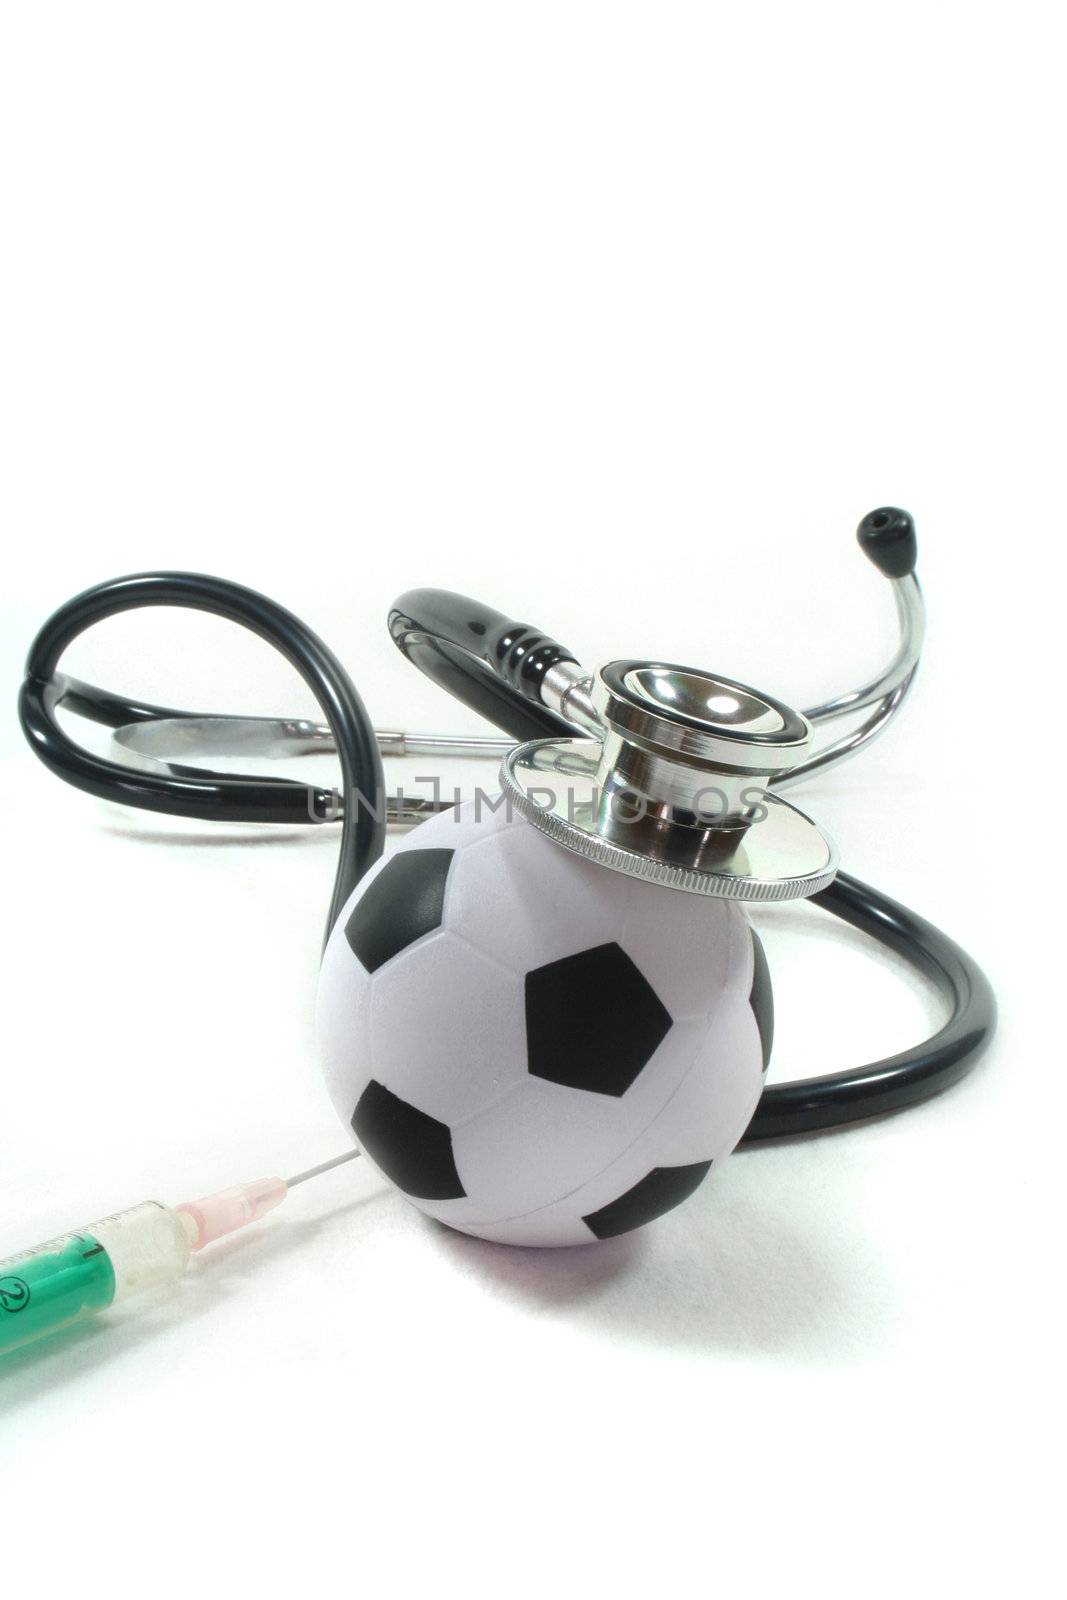 Stethoscope with football and syringe on a white background